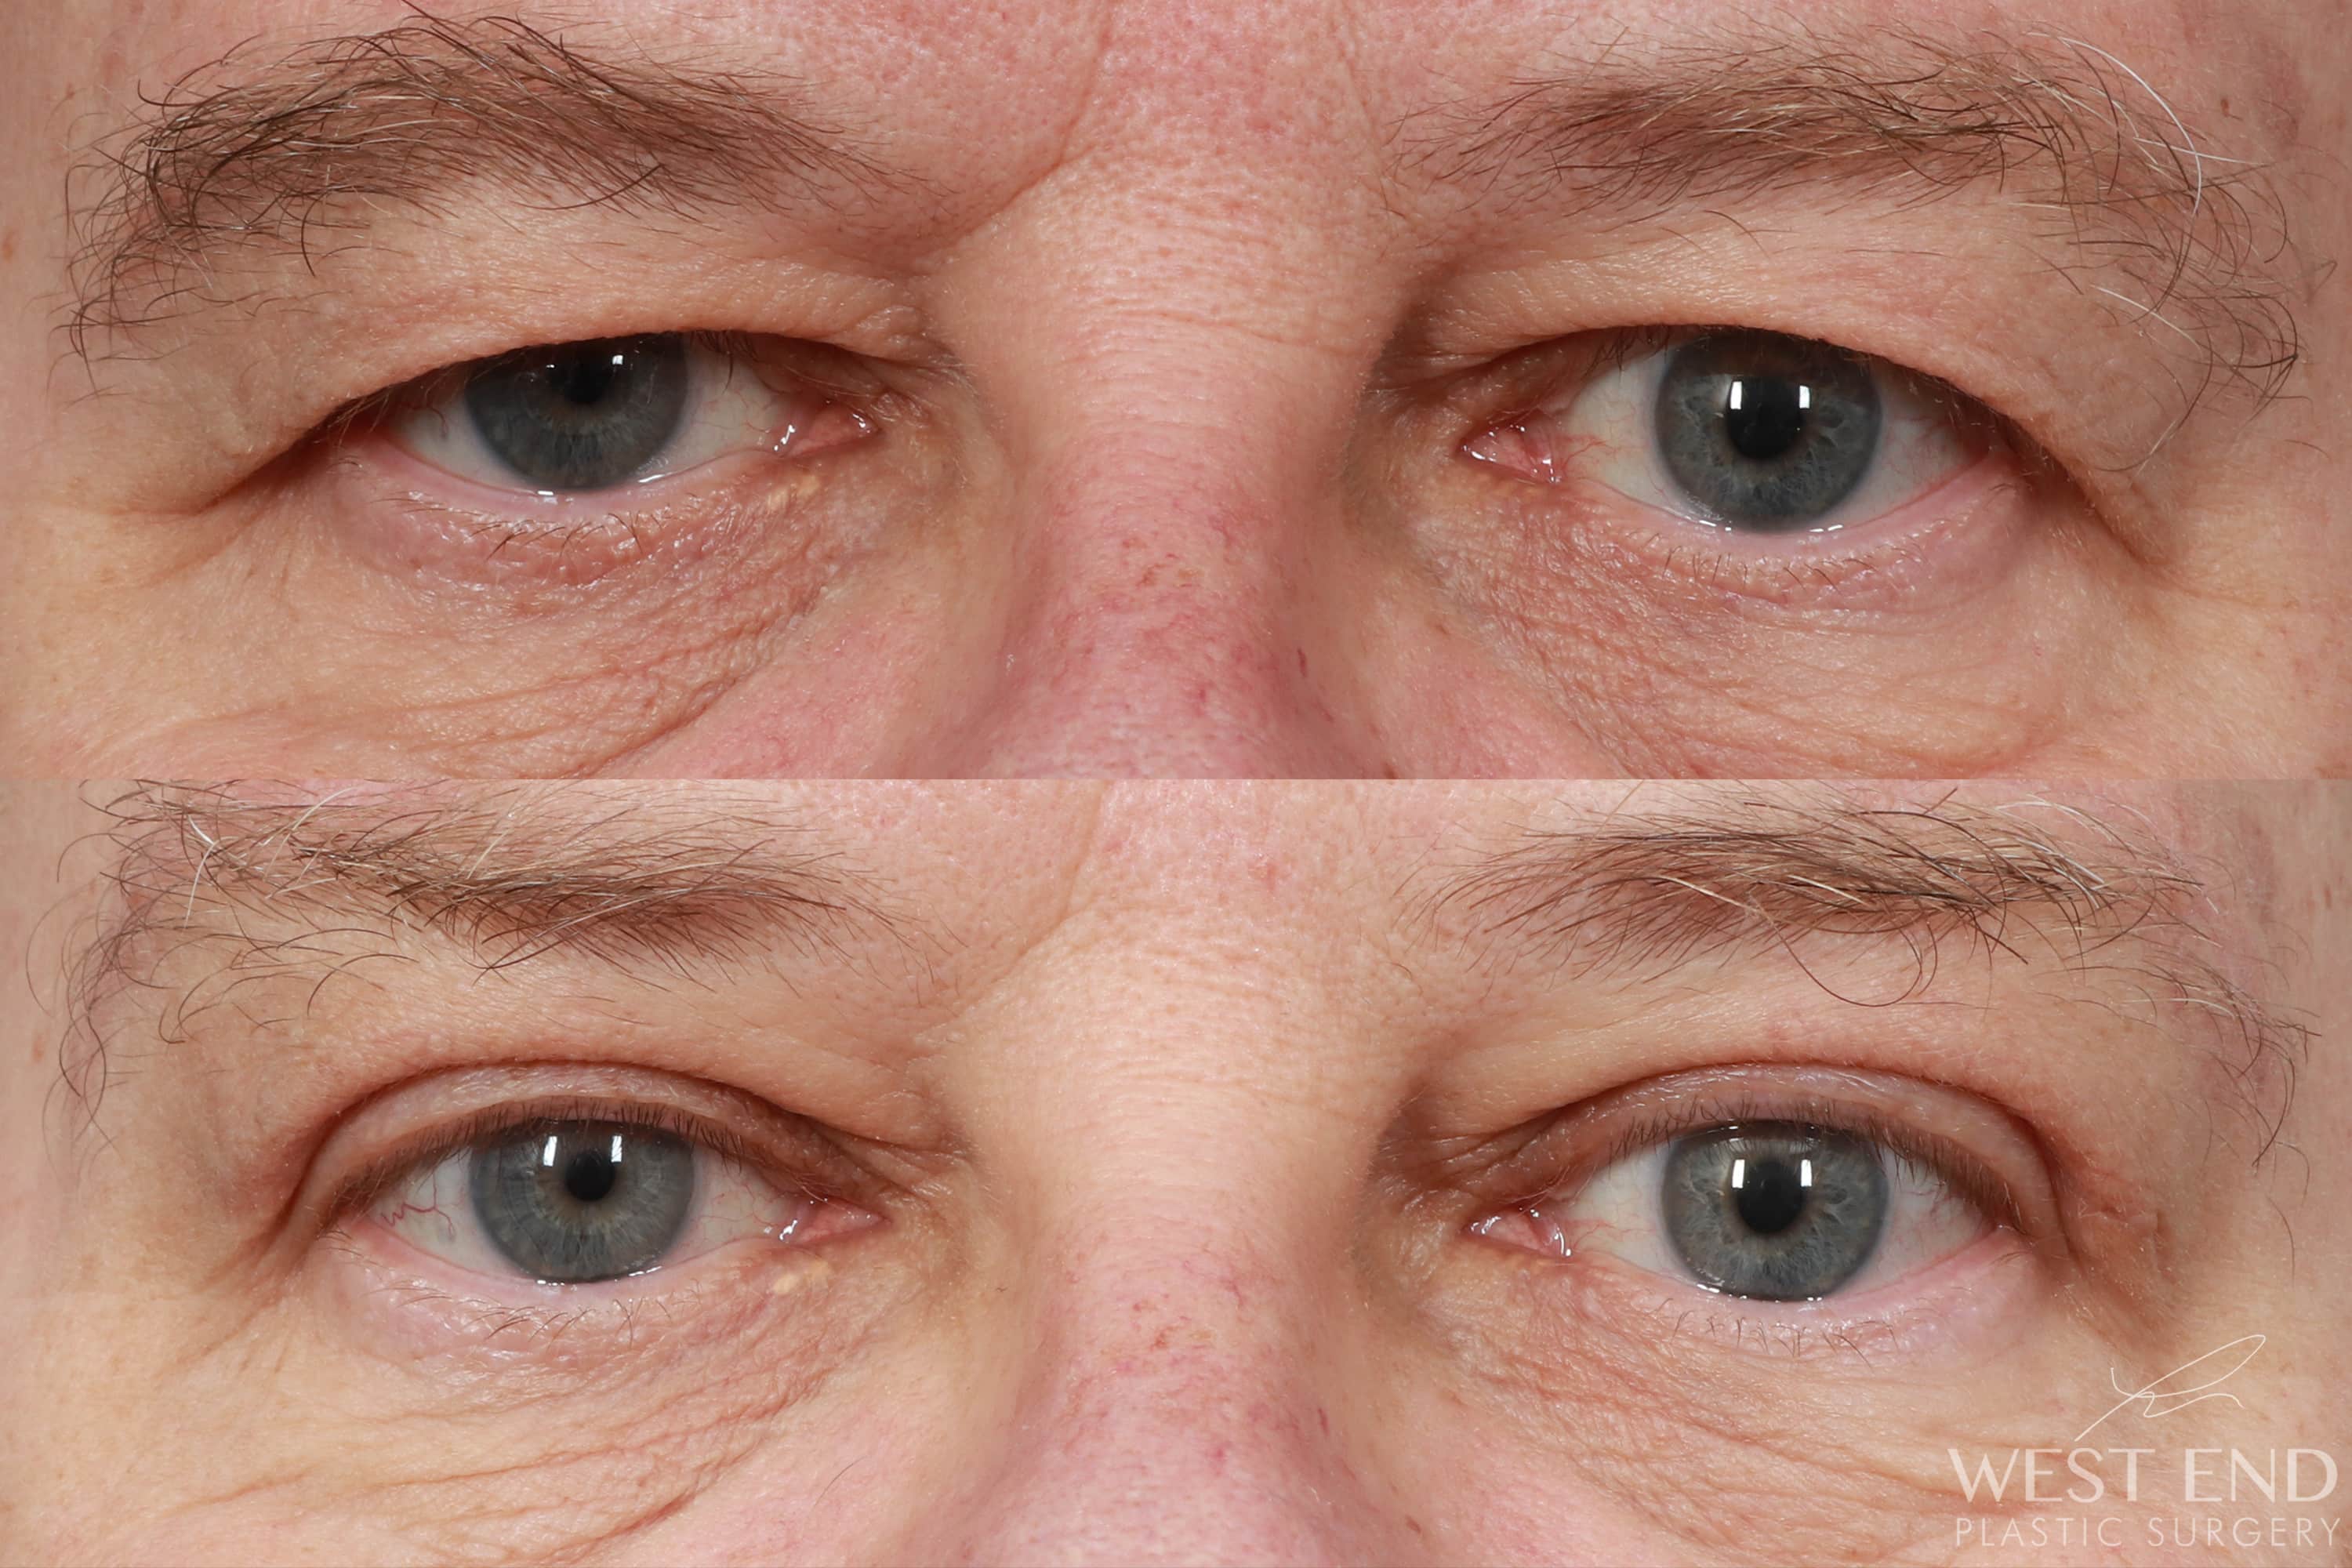 Upper Eyelid Lift And Brow Lift 2 Weeks Post Op Case 10348 West End